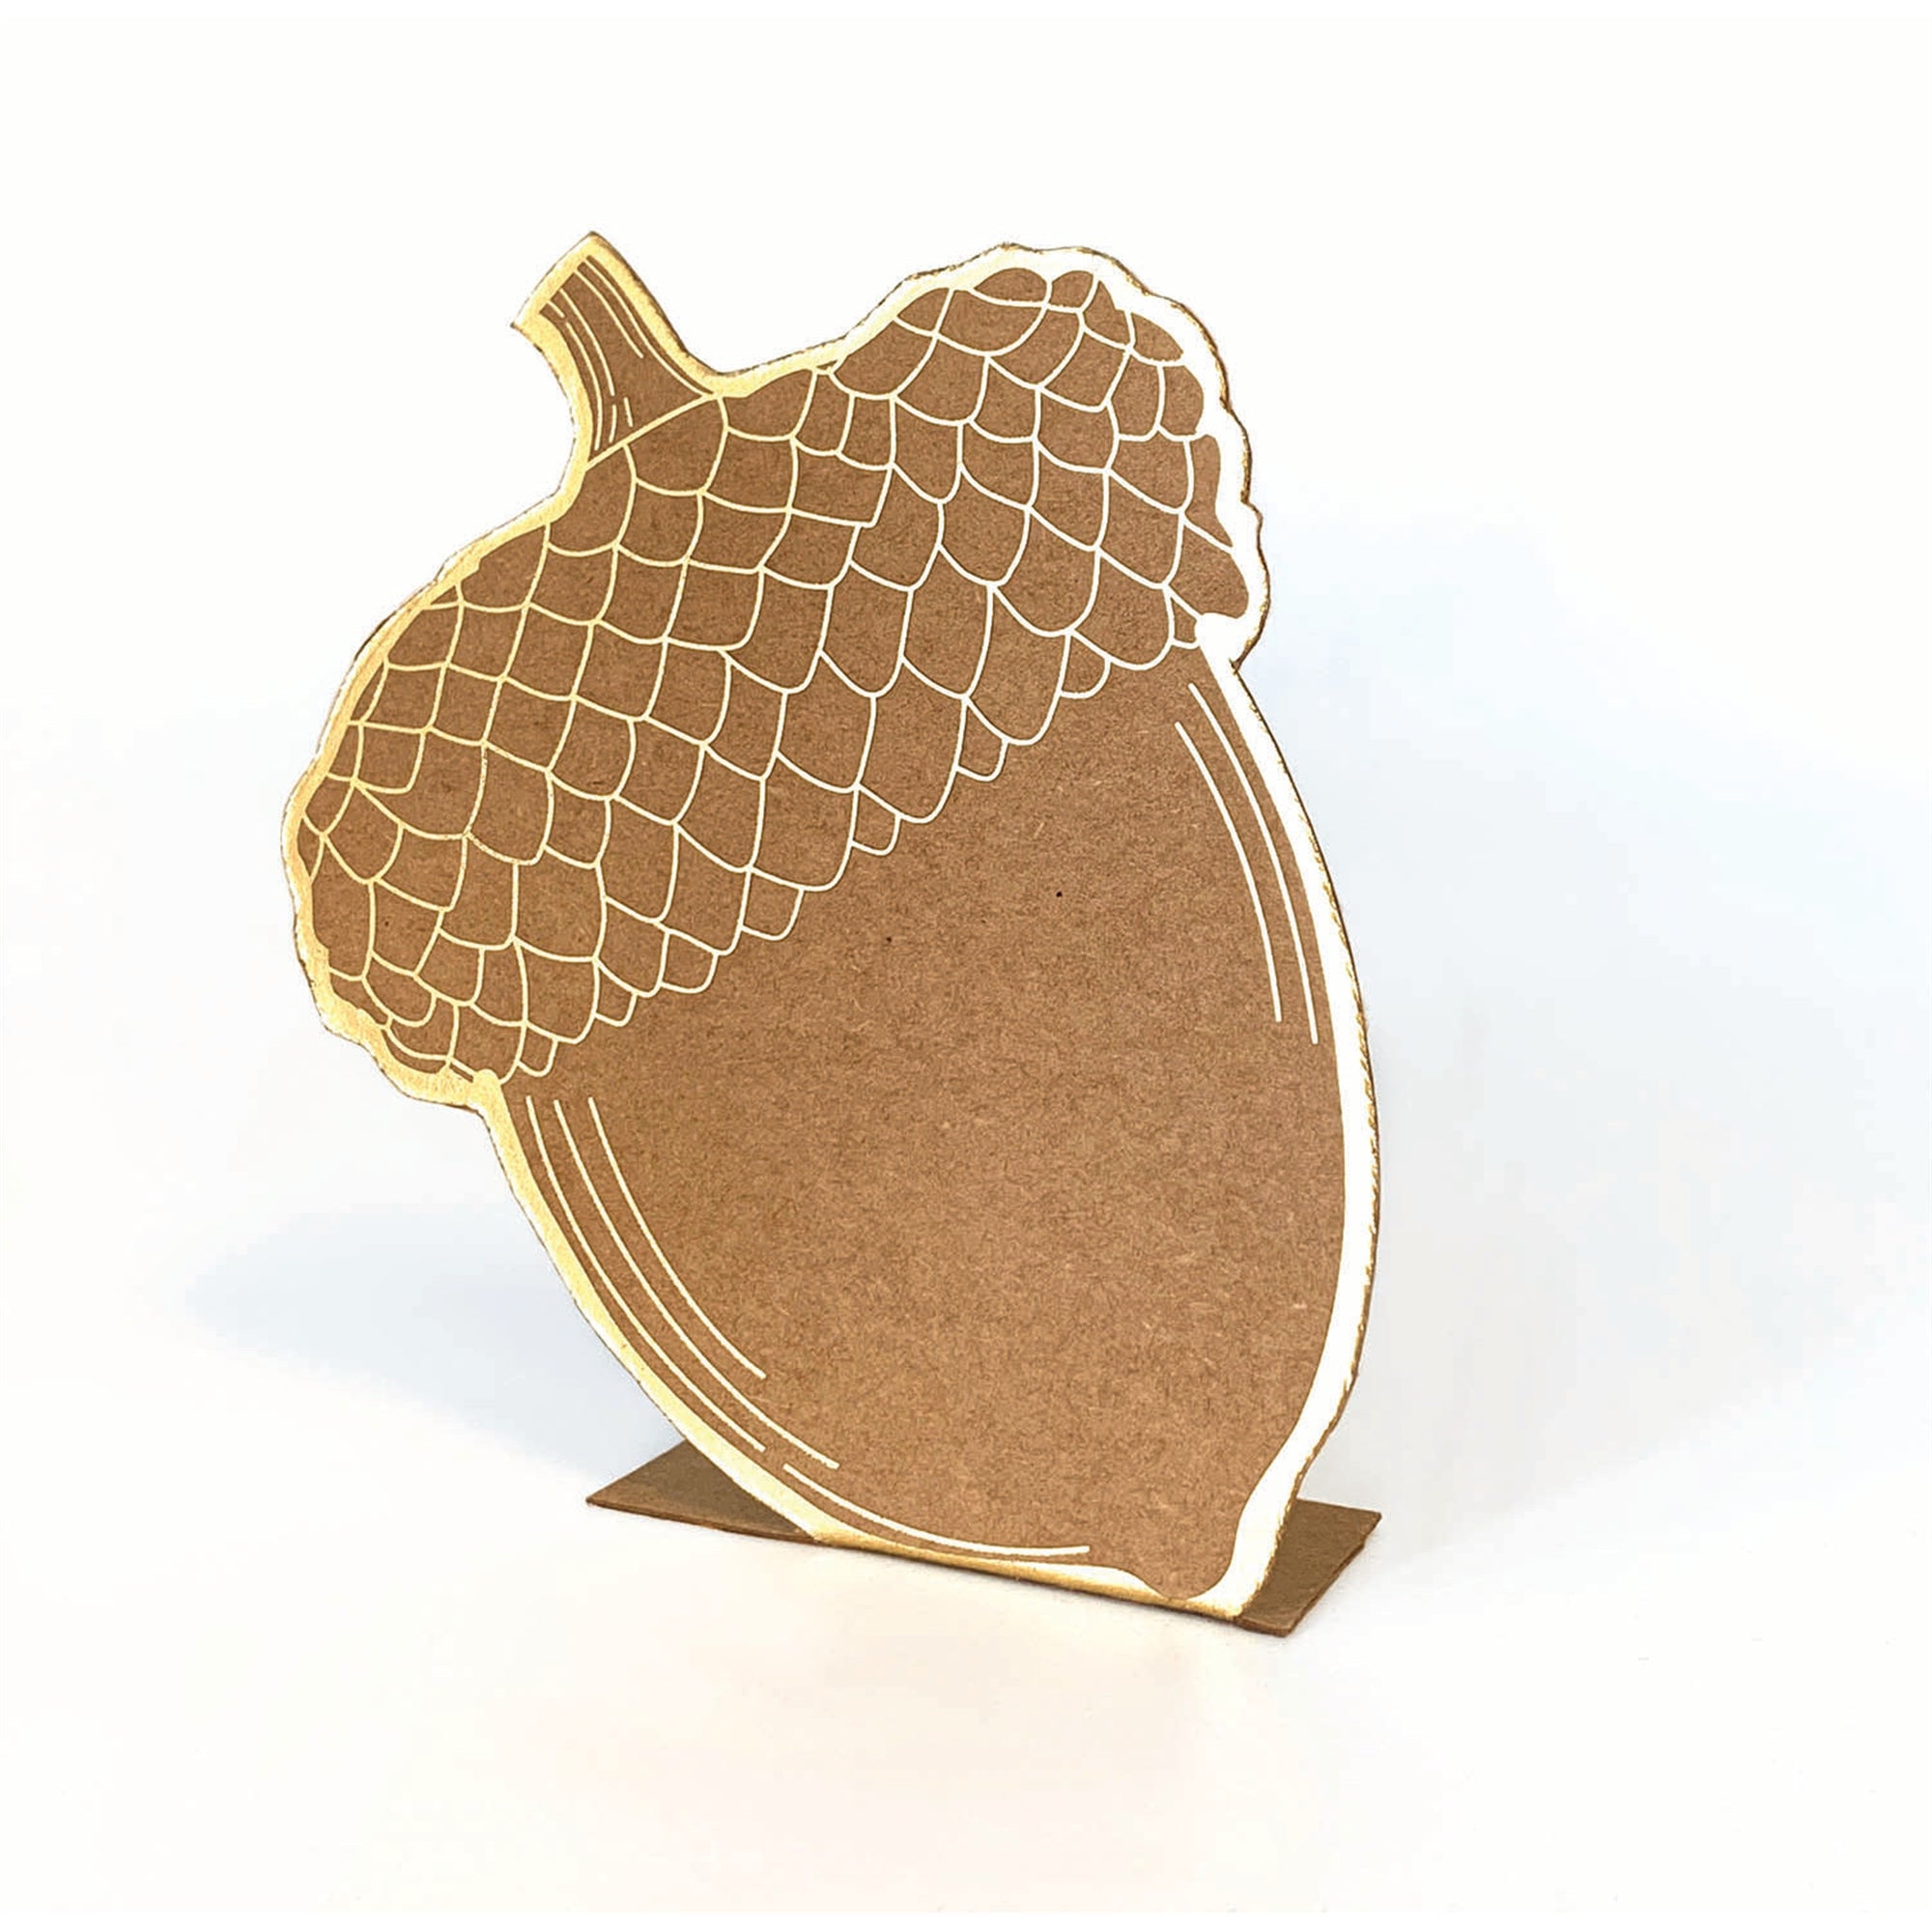 Hester & Cook Acorn Place cards